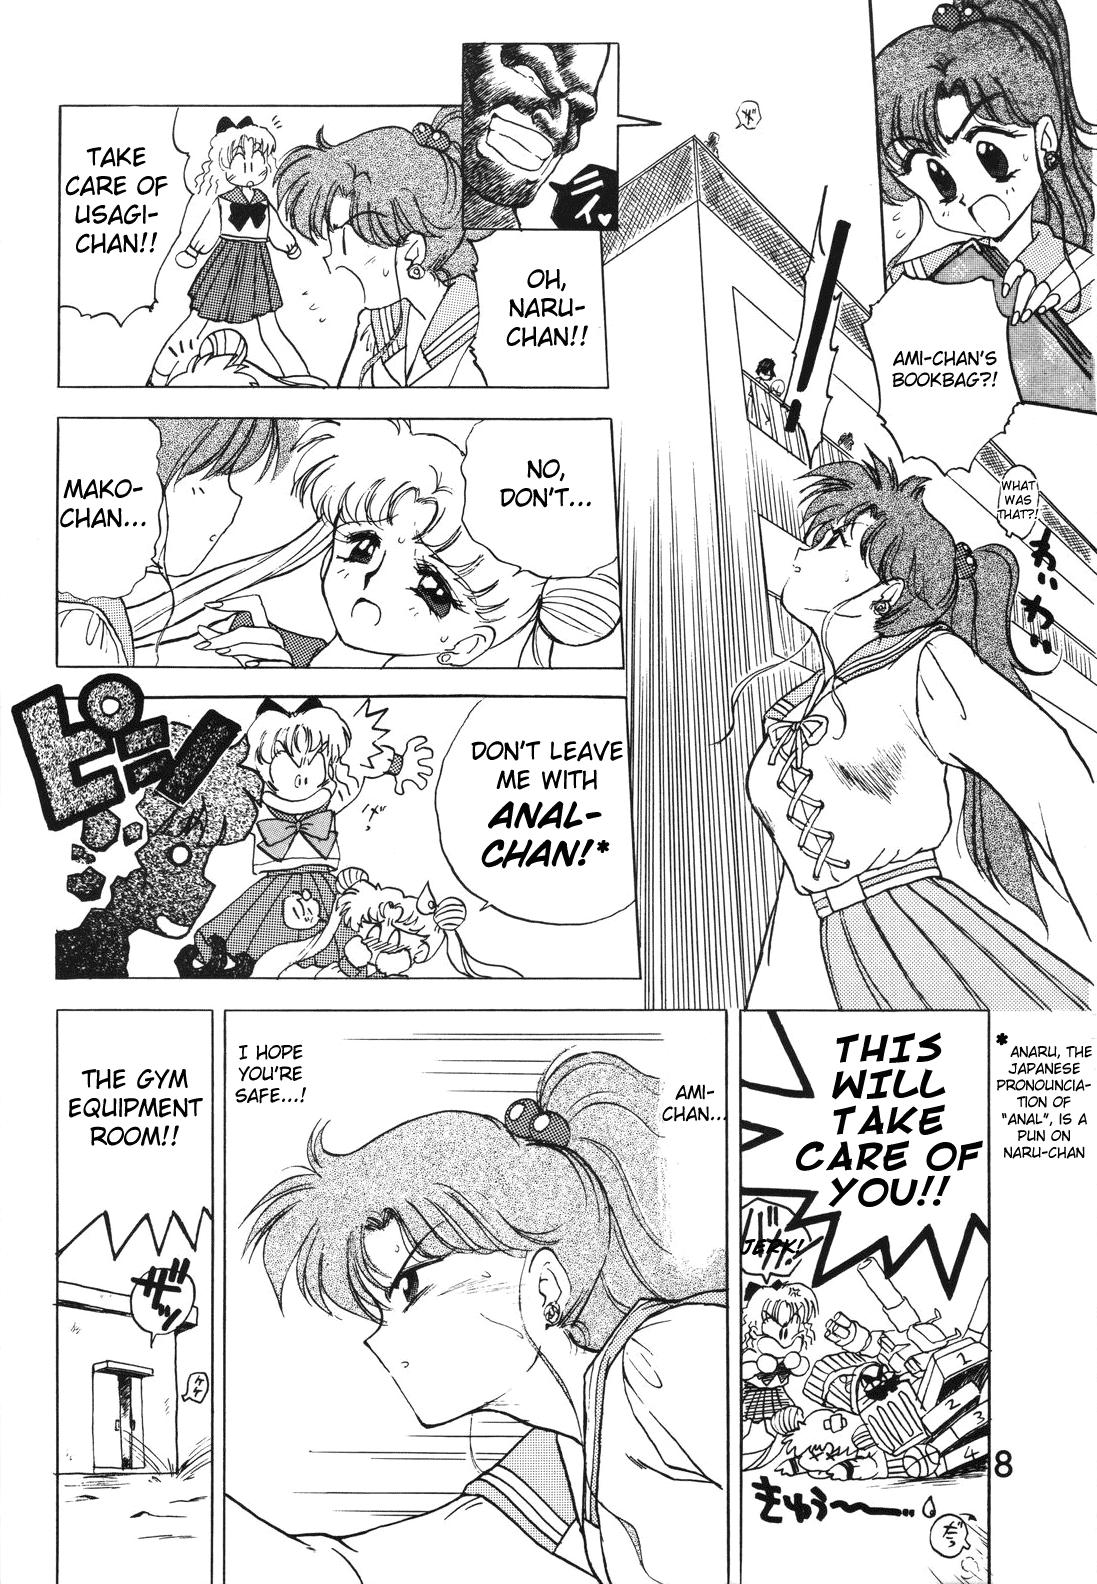 Spy Cam Submission Jupiter Plus - Sailor moon Whore - Page 10